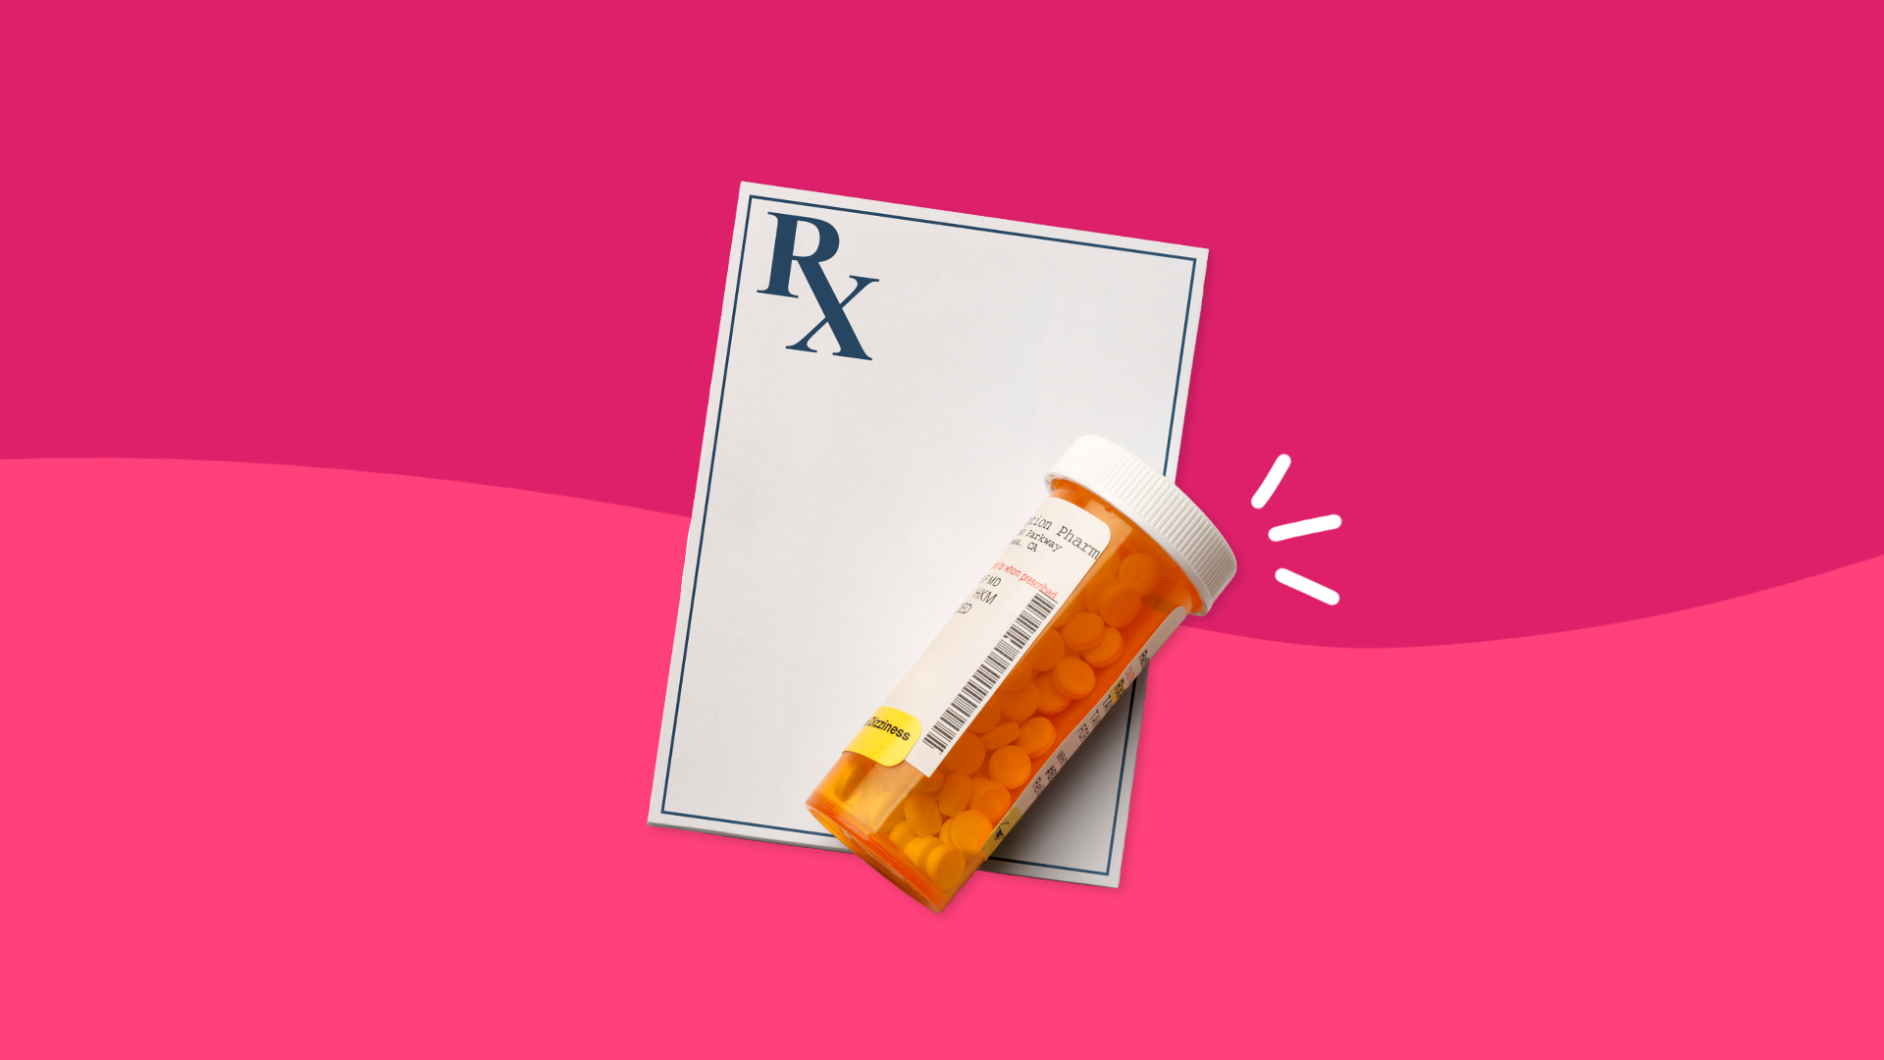 Prescription pad with pill bottle: Common Metronidazole side effects